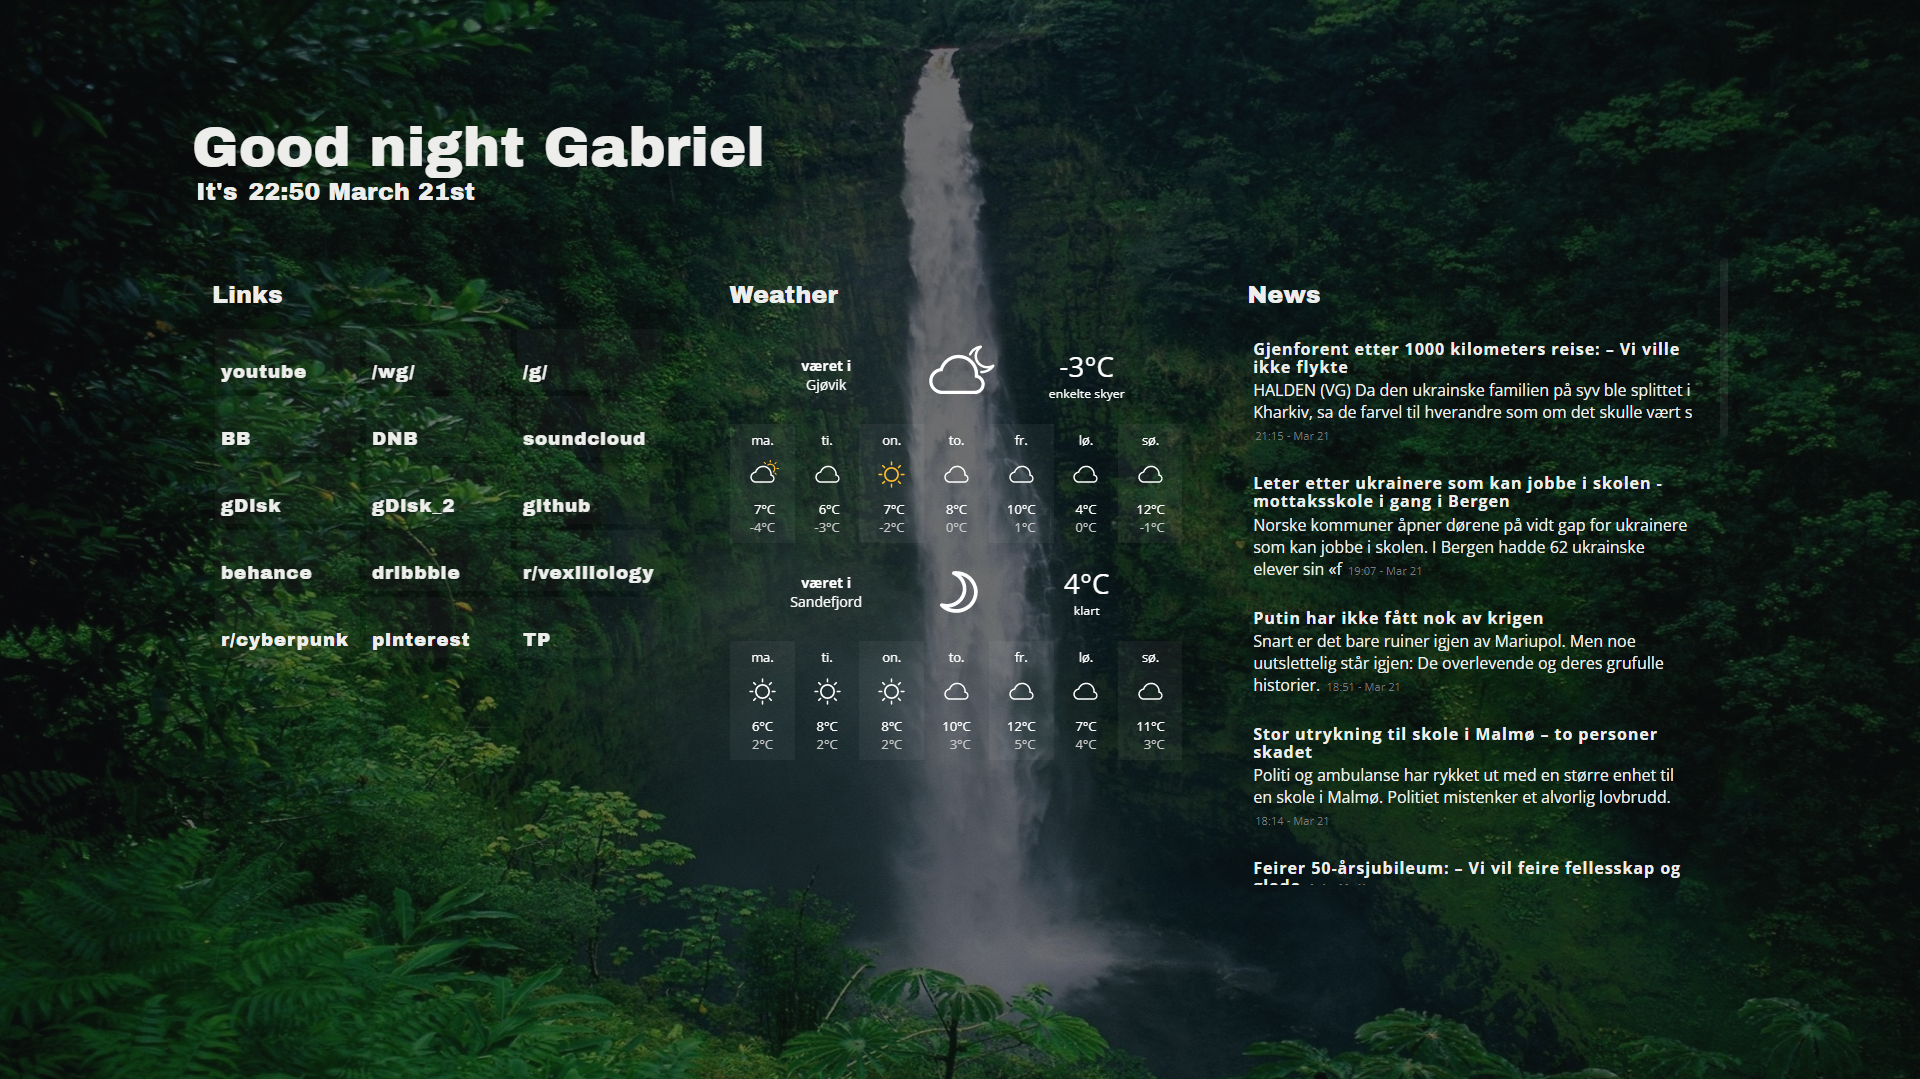 startpage userinterface on lush forest background